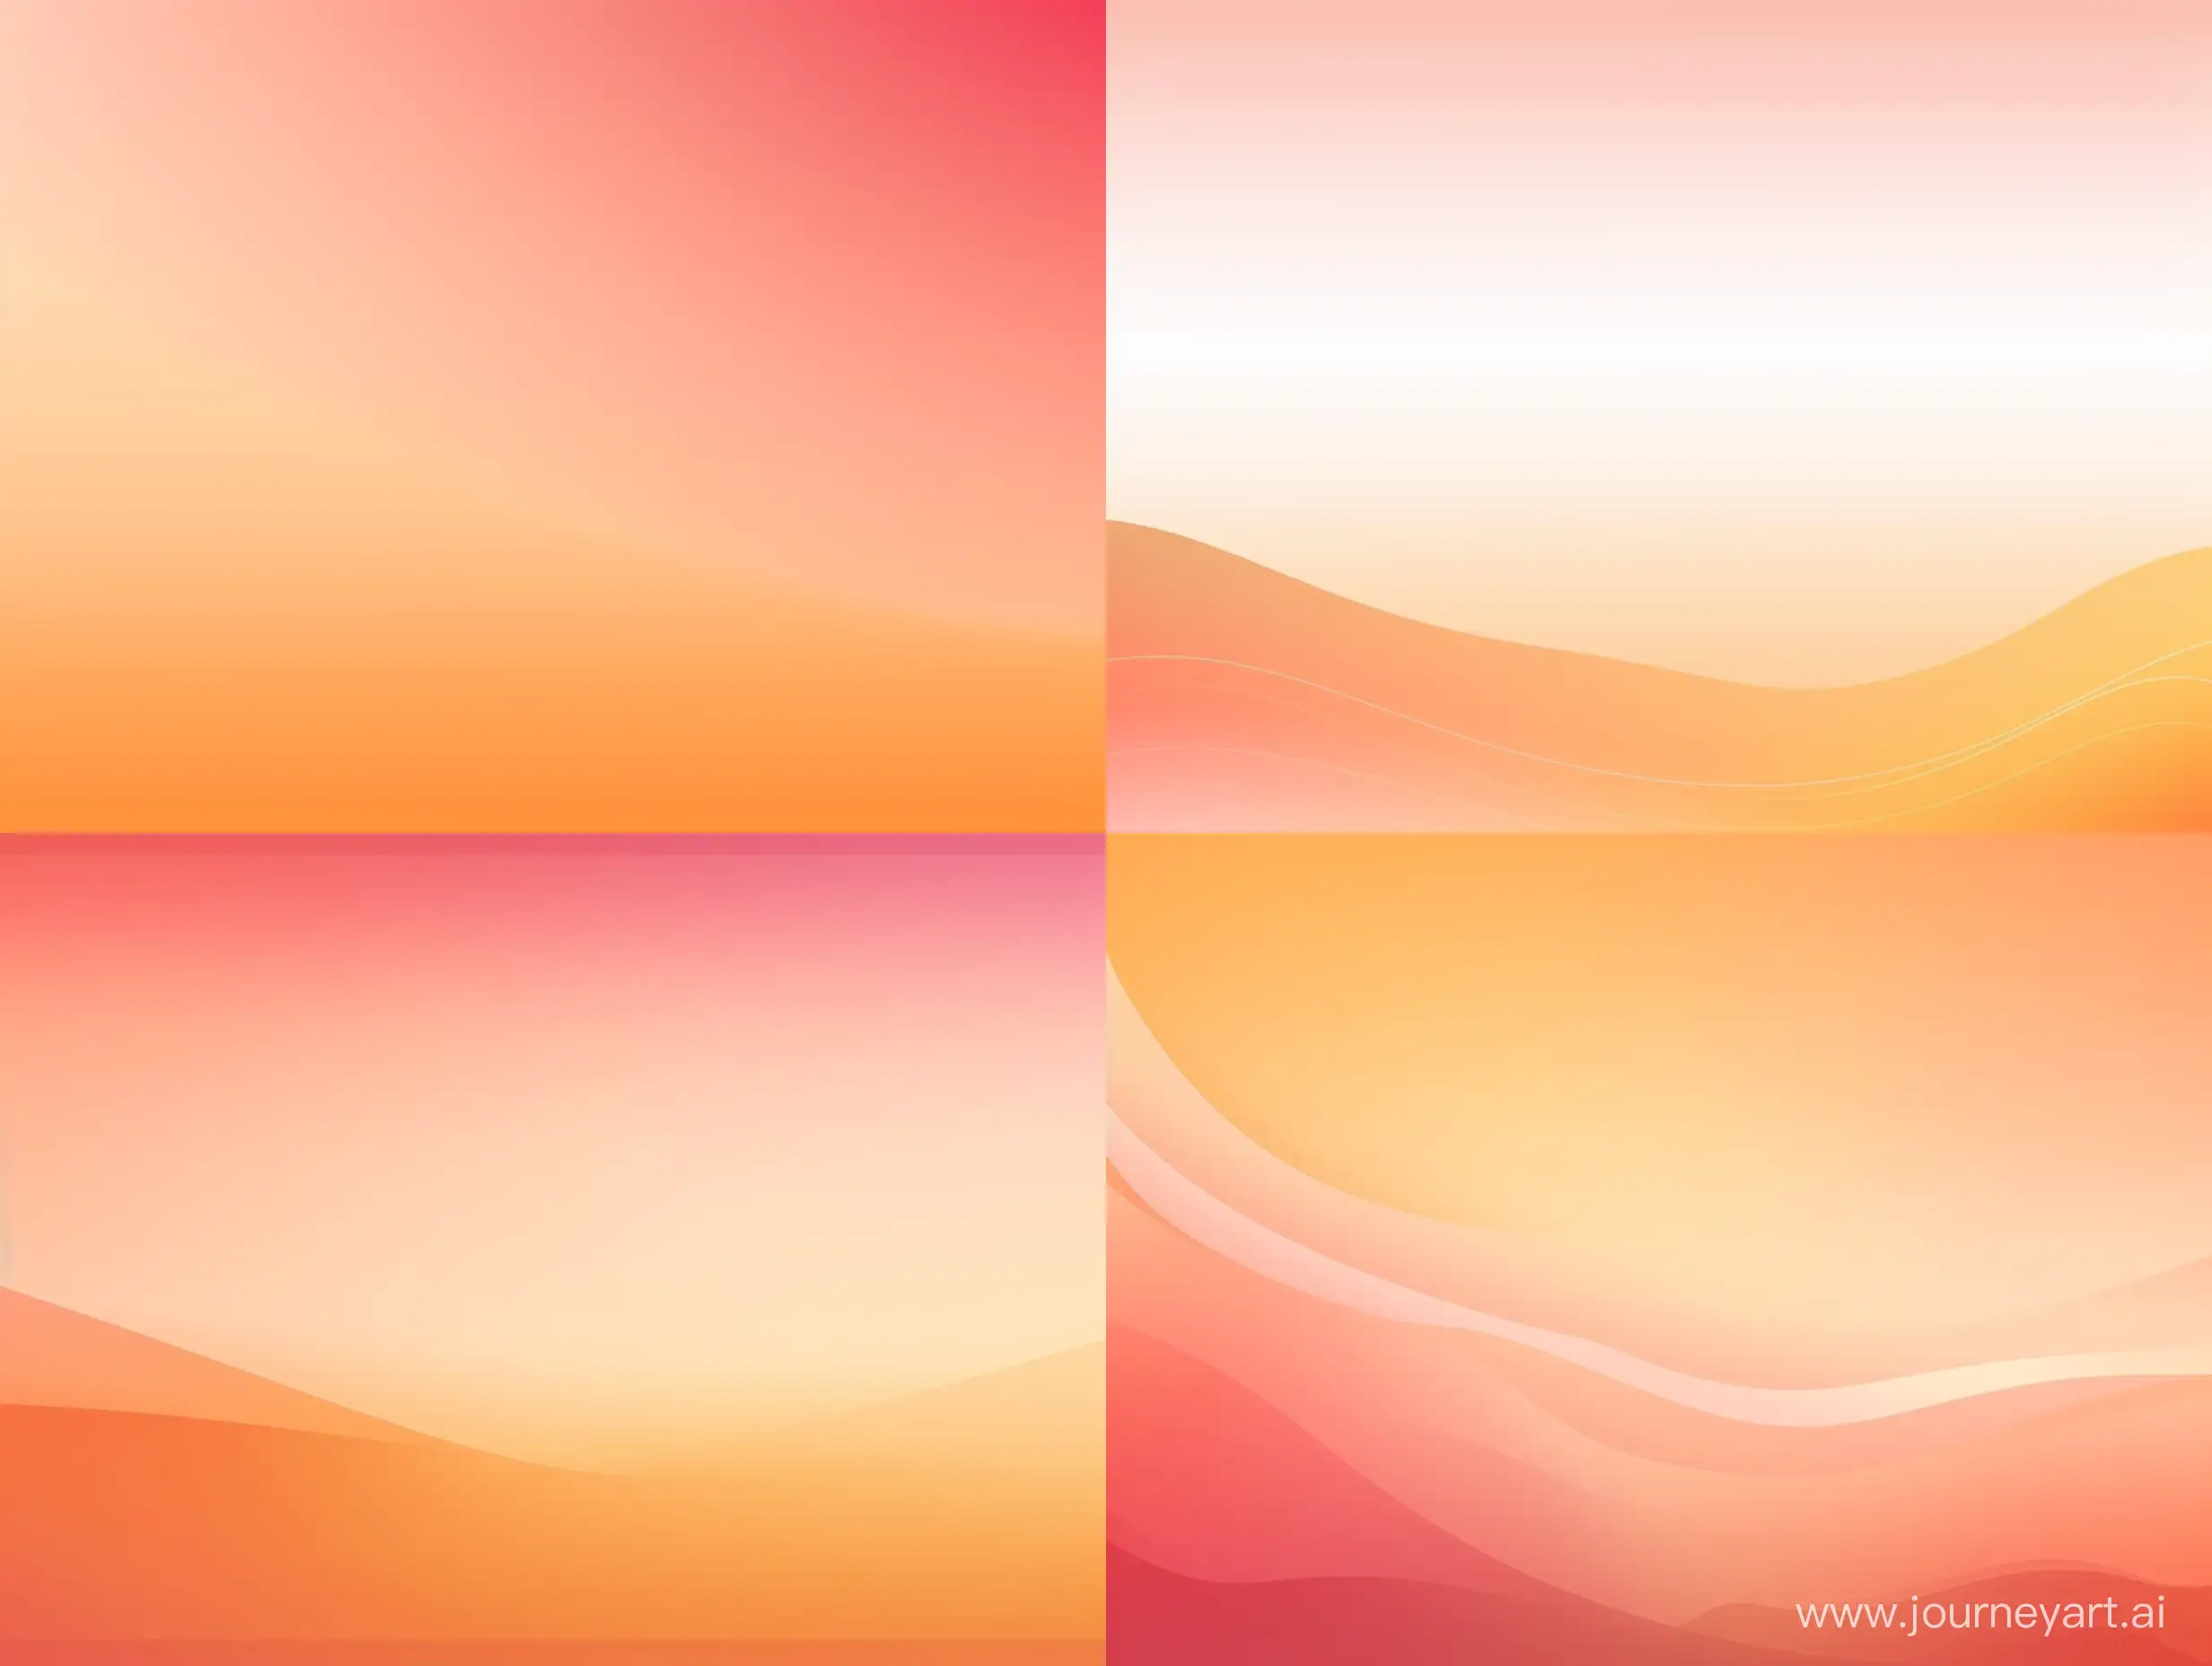 Create a widescreen banner with a warm color gradient background that smoothly transitions from a golden yellow on the left to the specific shade of orange #E9843C in the middle, and then to a soft pink on the right. The gradient should be harmonious and peaceful, suitable for a website header, with a subtle grain or noise texture to give it a modern yet slightly retro feel. Make sure the central part of the gradient prominently features the orange shade #E9843C to match the website's primary color scheme.